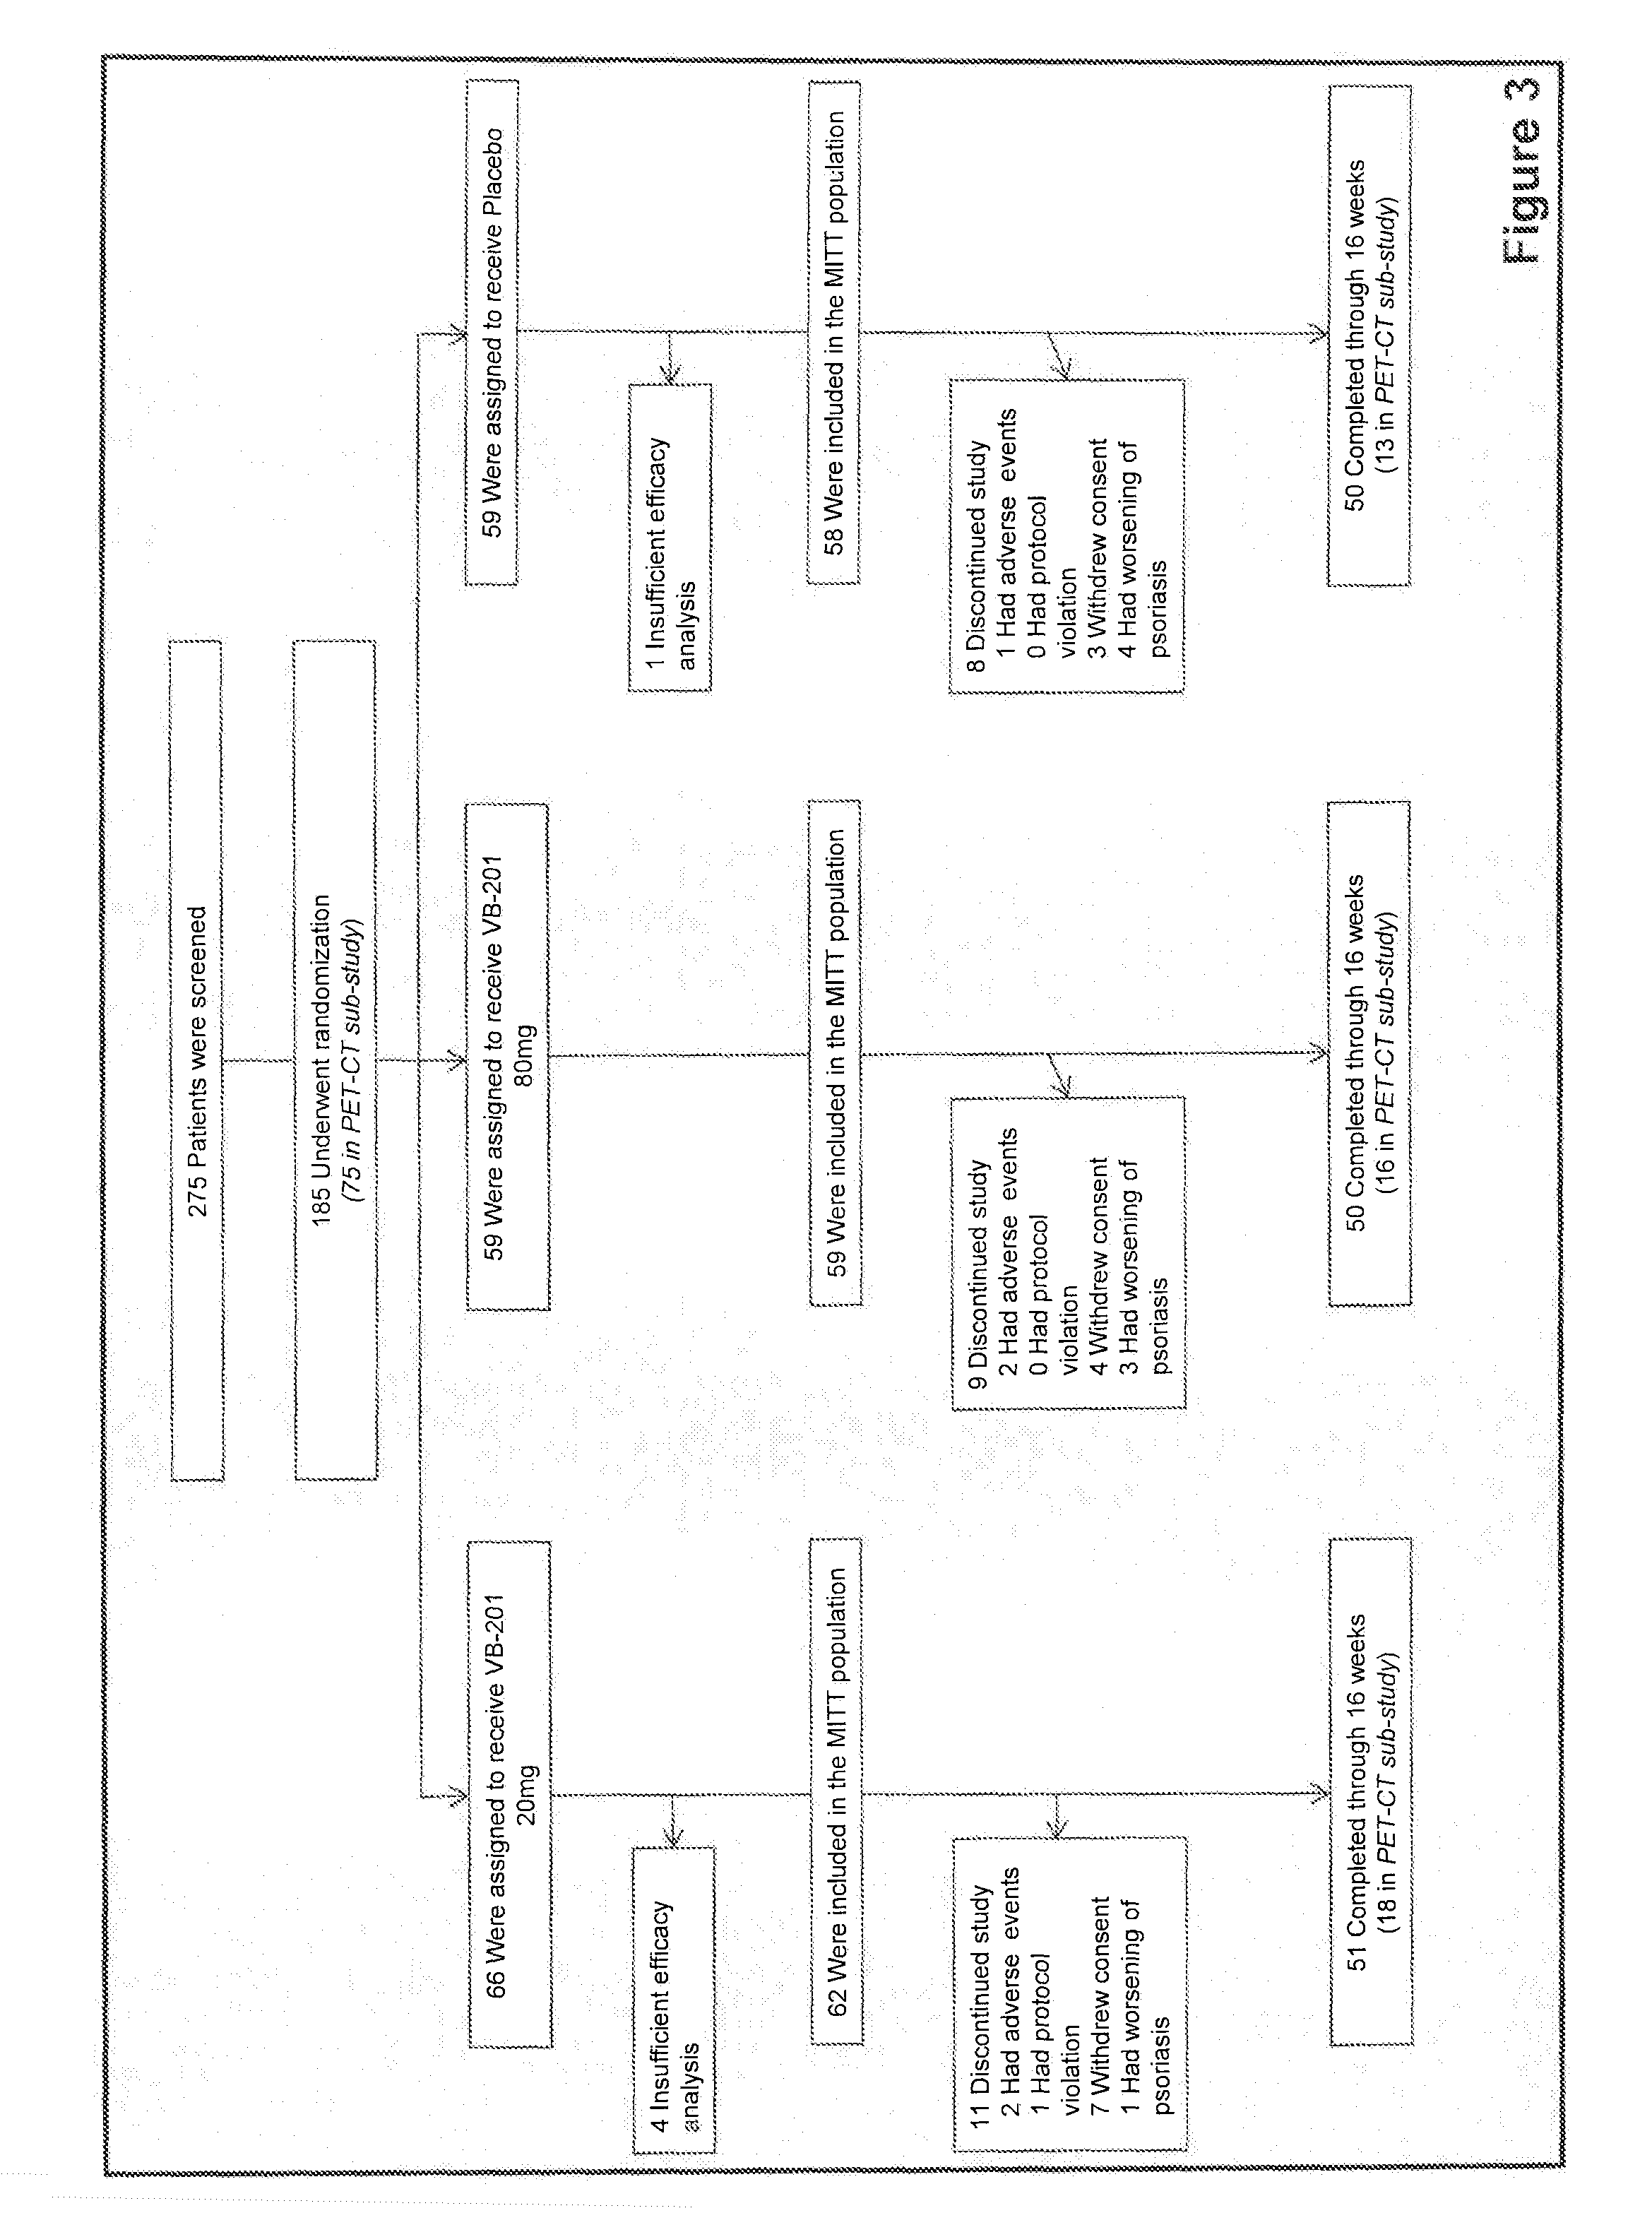 Methods for treating psoriasis and vascular inflammation